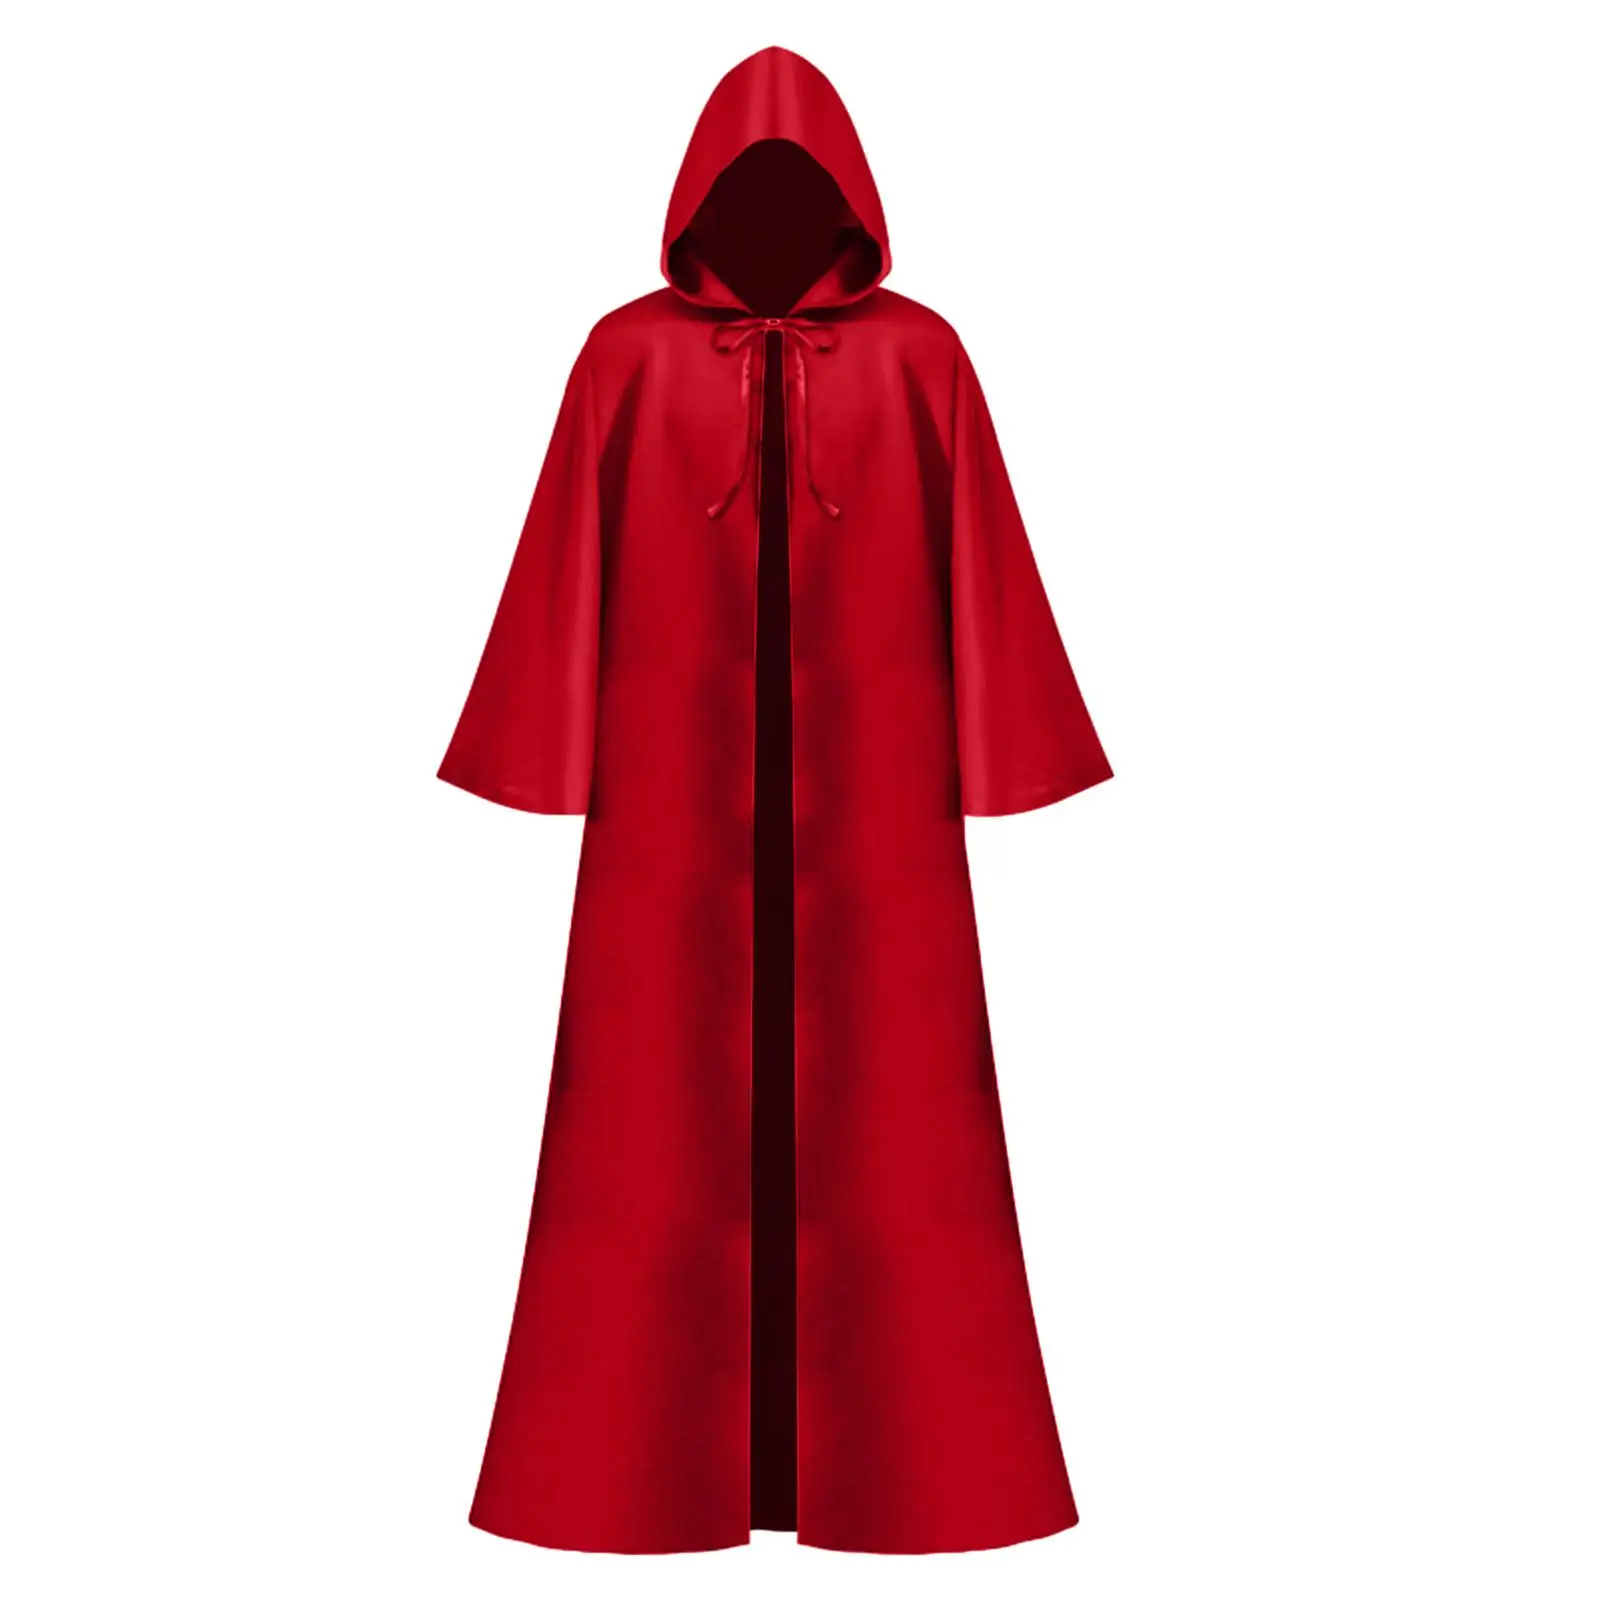 Halloween Hooded Cloak Cowl Full Length Long Hooded Cloak for Vintage Gathering Performance Fancy Dress Party Punk Party